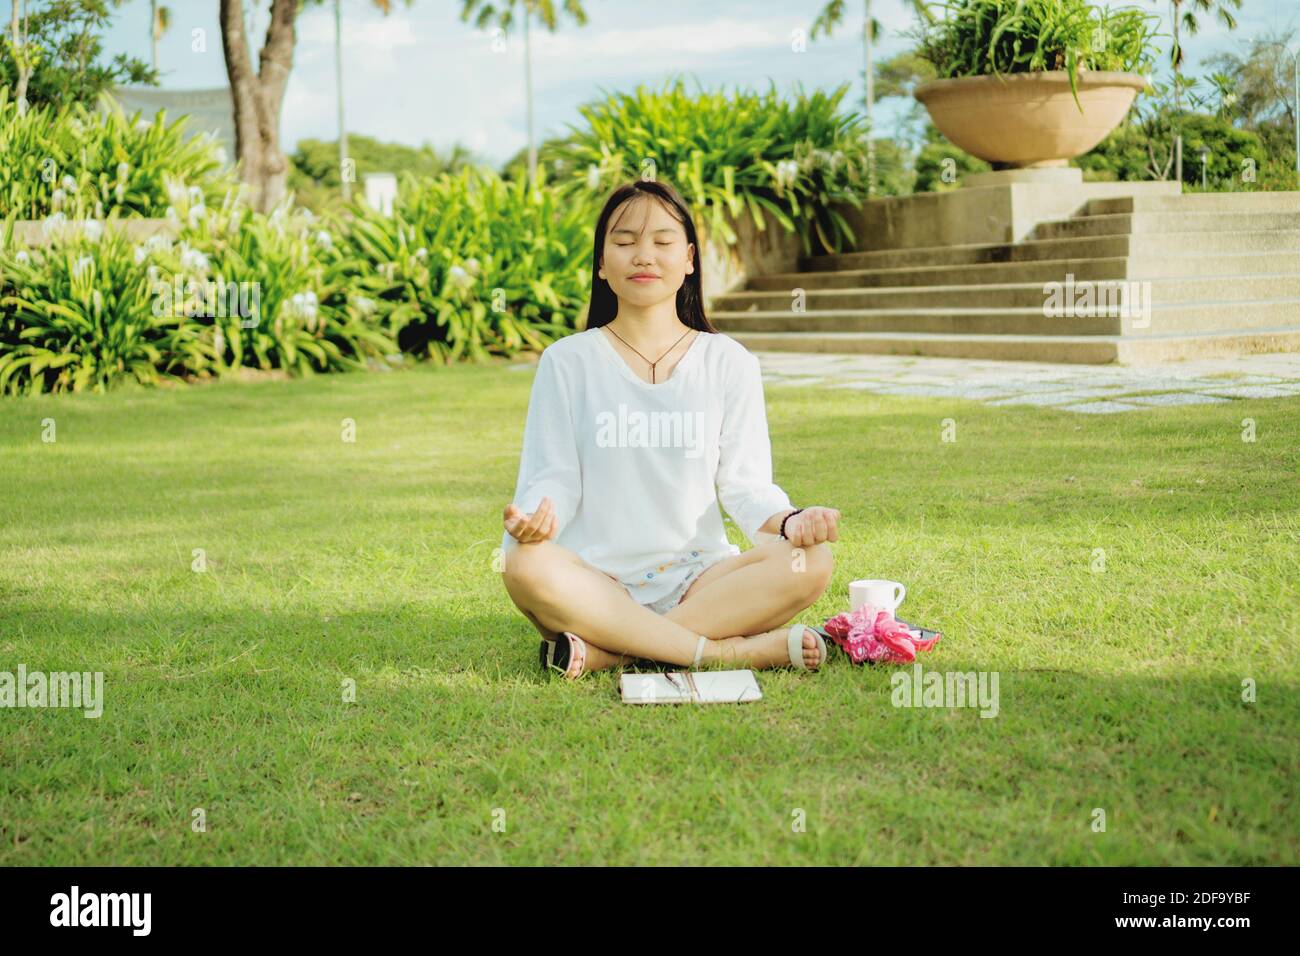 Young asian woman sitting with legs cross on the grass in a public park and meditating. Outdoor lifestyle photography. Stock Photo